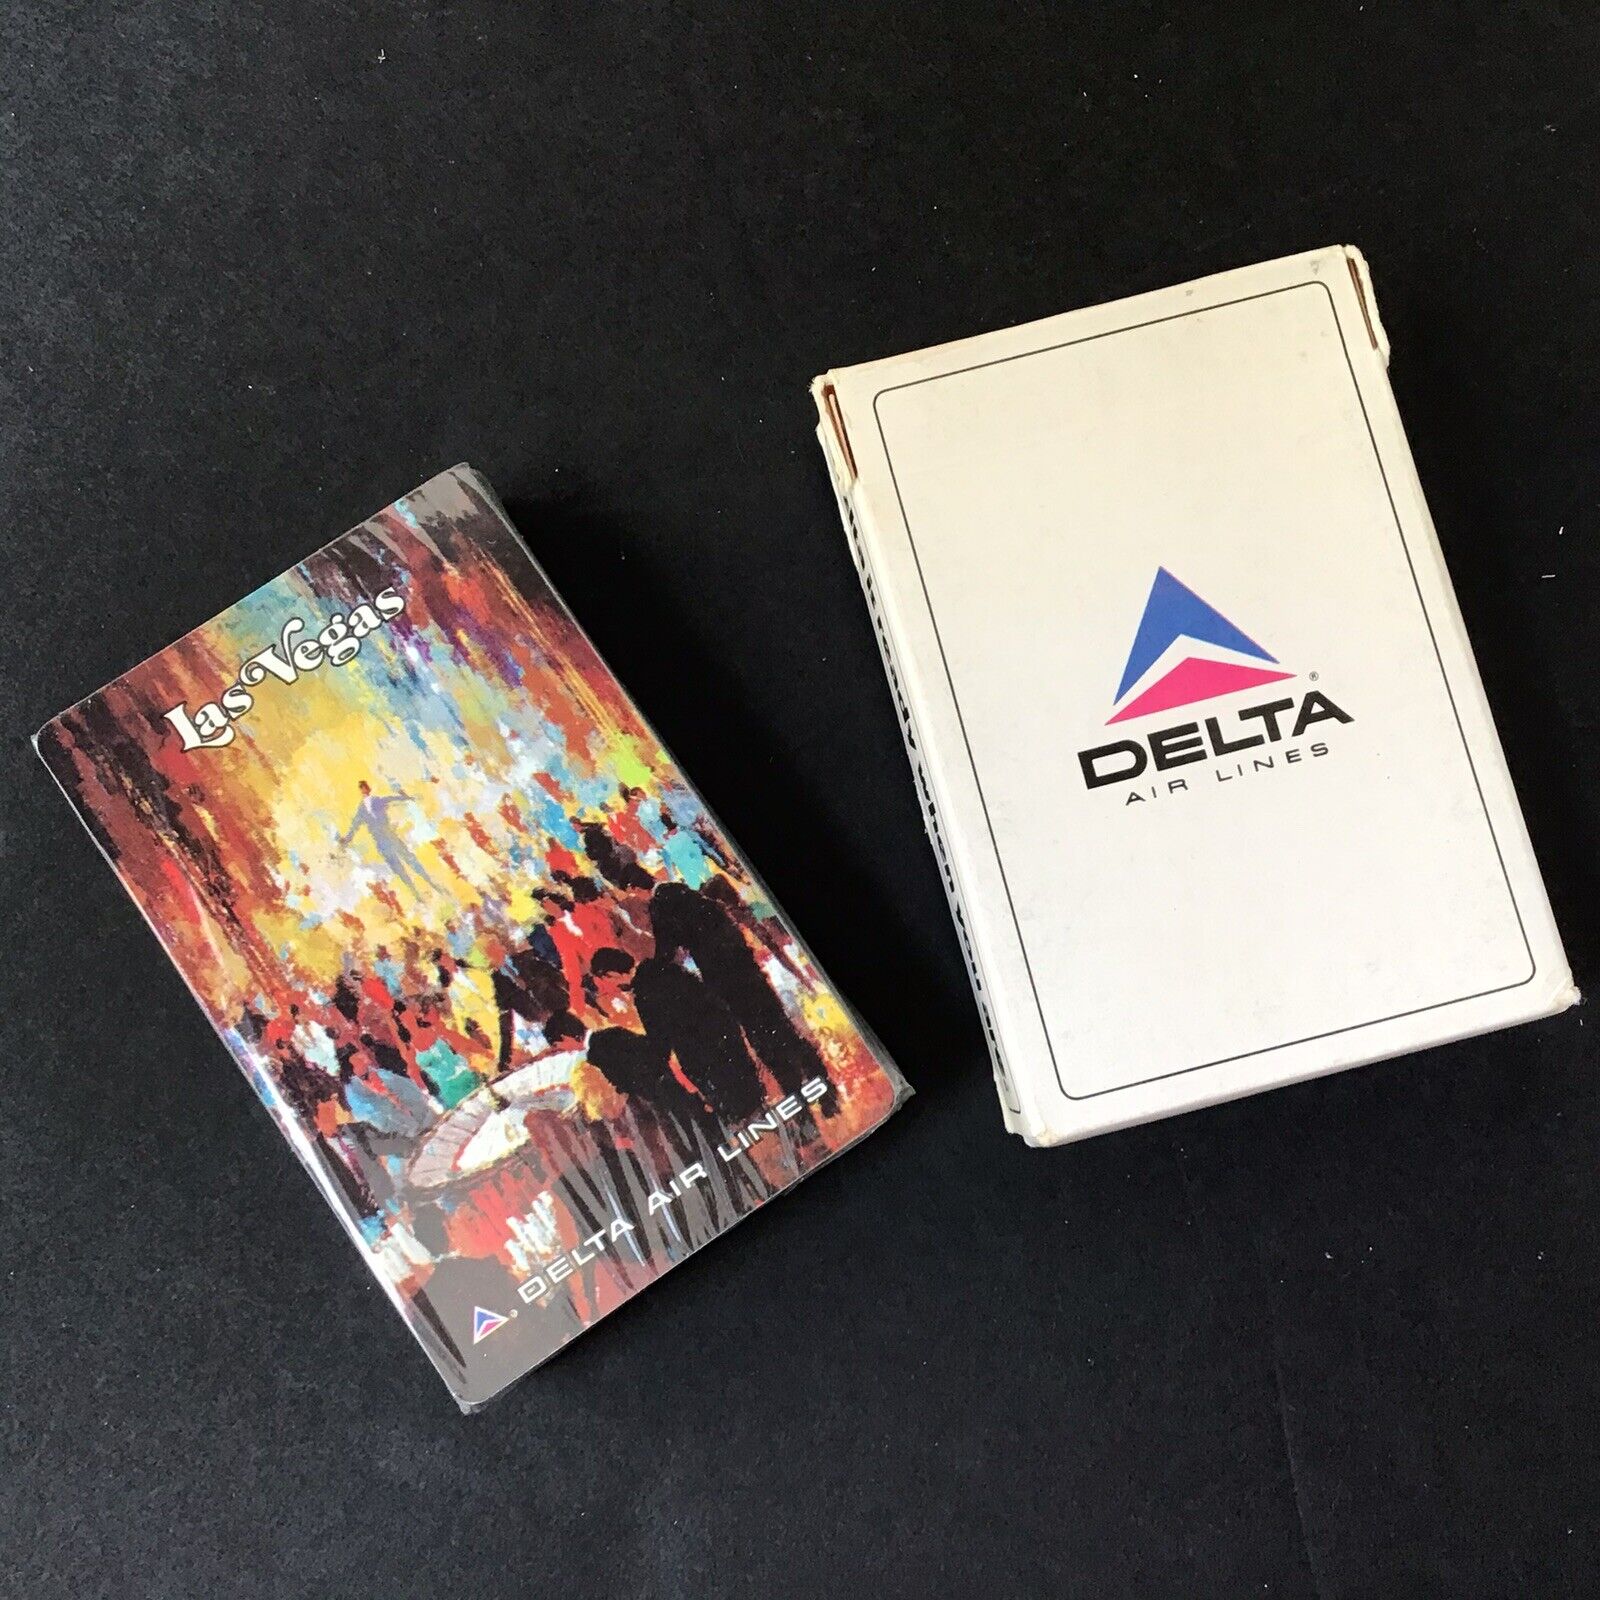 Delta Air Lines LAS VEGAS Playing Cards SEALED Jack Laycox NOS